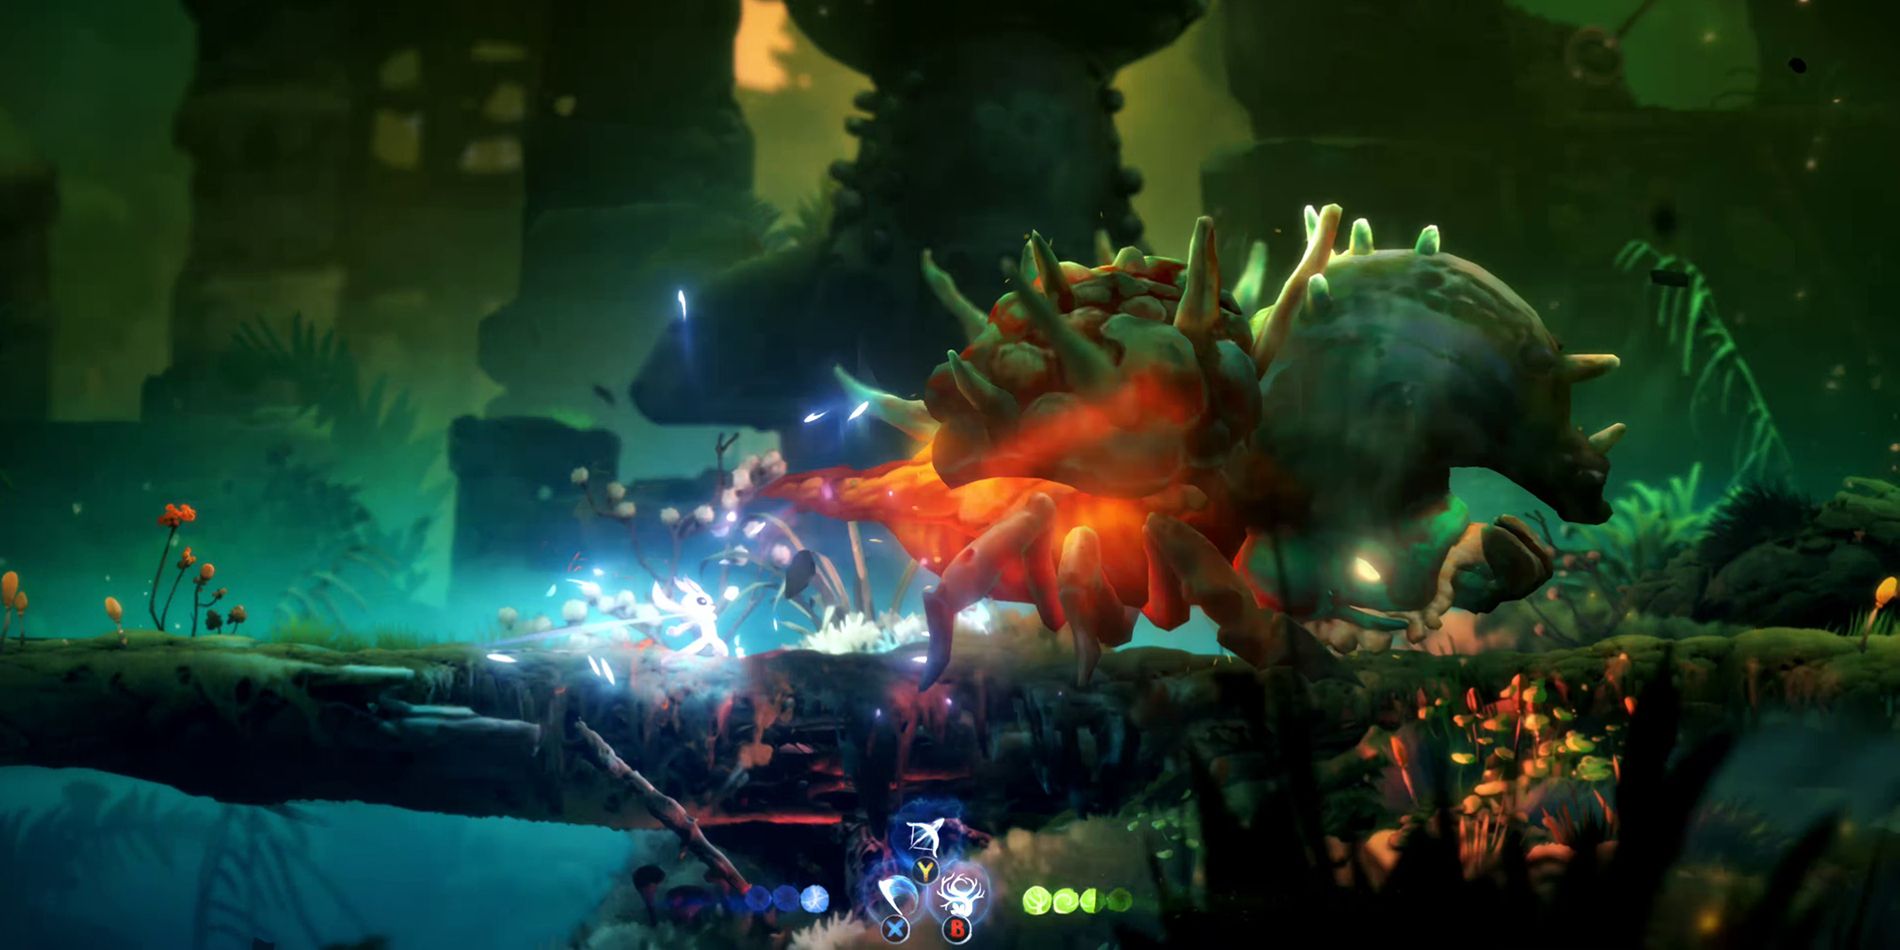 Ori fights a massive monster boss in the Nintendo Switch game Ori and the Will of the Wisps.